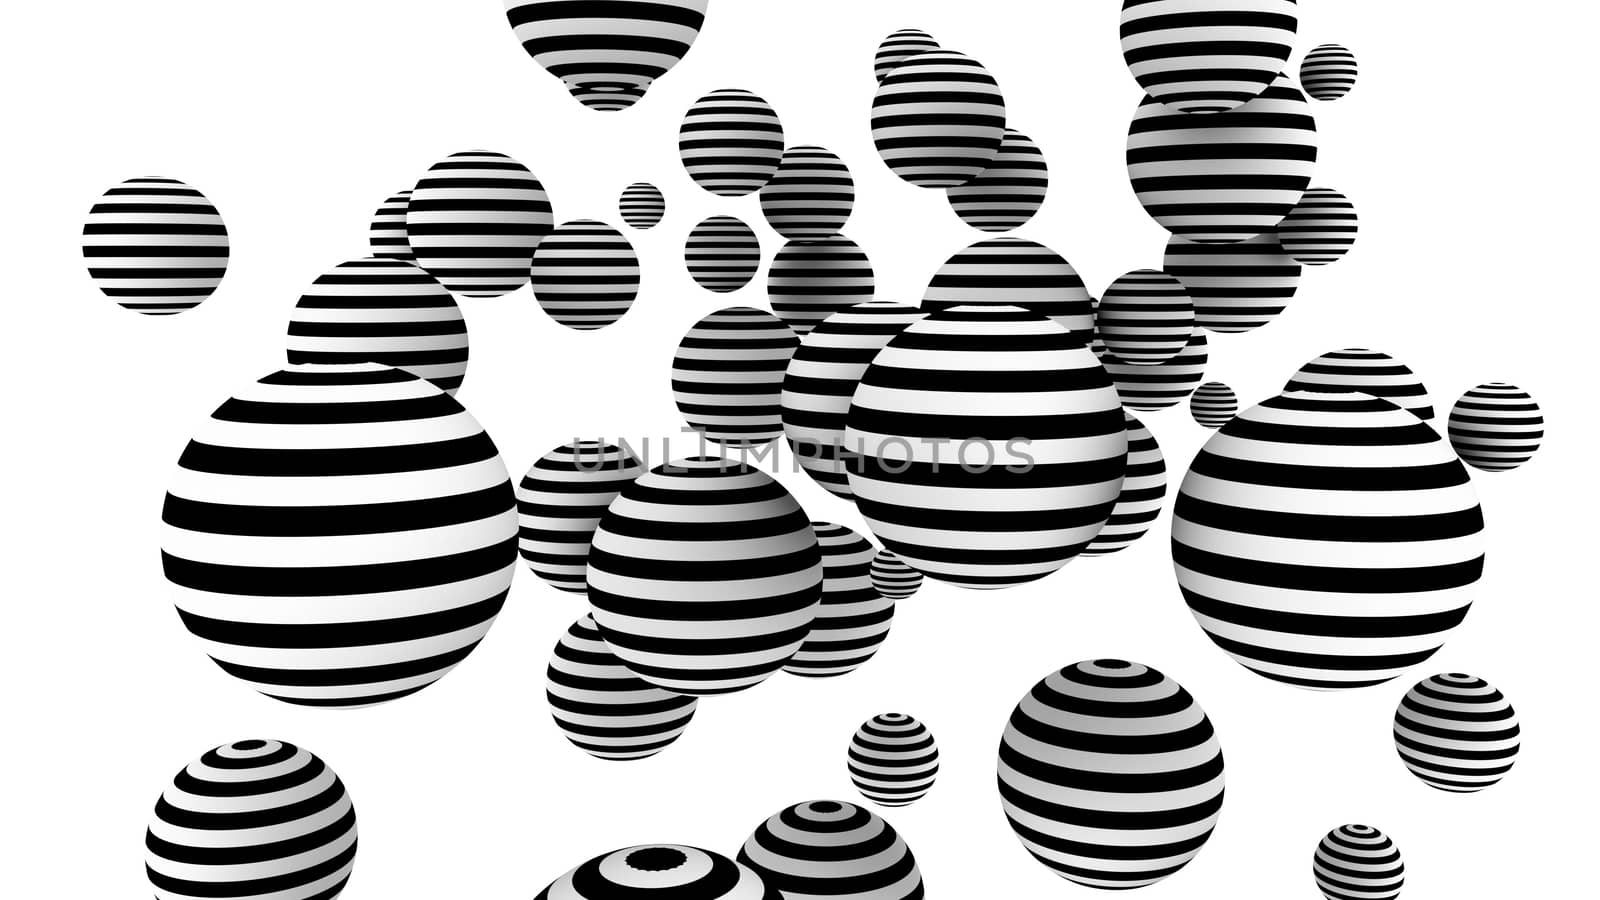 Optical 3d illustration of many black and white spheres soaring in the white background. They look festive, optimistic and beautiful.